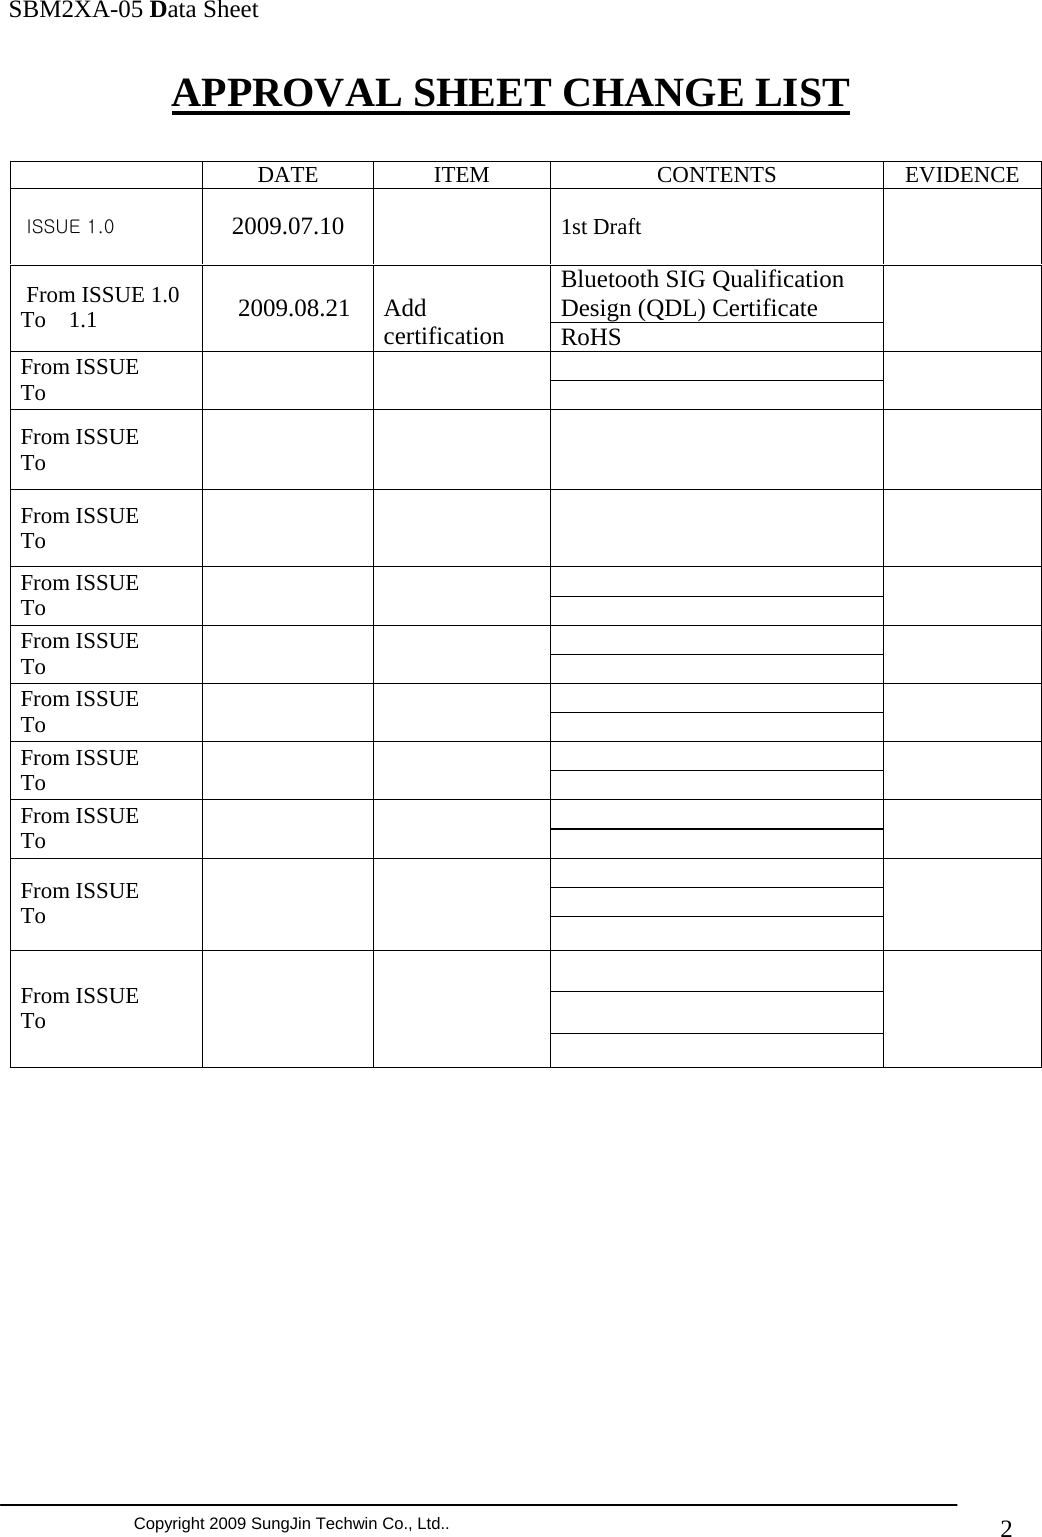               SBM2XA-05 Data Sheet  Copyright 2009 SungJin Techwin Co., Ltd..   2APPROVAL SHEET CHANGE LIST     DATE   ITEM   CONTENTS  EVIDENCE  ISSUE 1.0  2009.07.10  1st Draft   Bluetooth SIG Qualification Design (QDL) Certificate  From ISSUE 1.0 To    1.1     2009.08.21   Add certification  RoHS   From ISSUE To      From ISSUE To       From ISSUE To        From ISSUE To       From ISSUE To       From ISSUE To       From ISSUE To       From ISSUE To        From ISSUE To        From ISSUE To                   